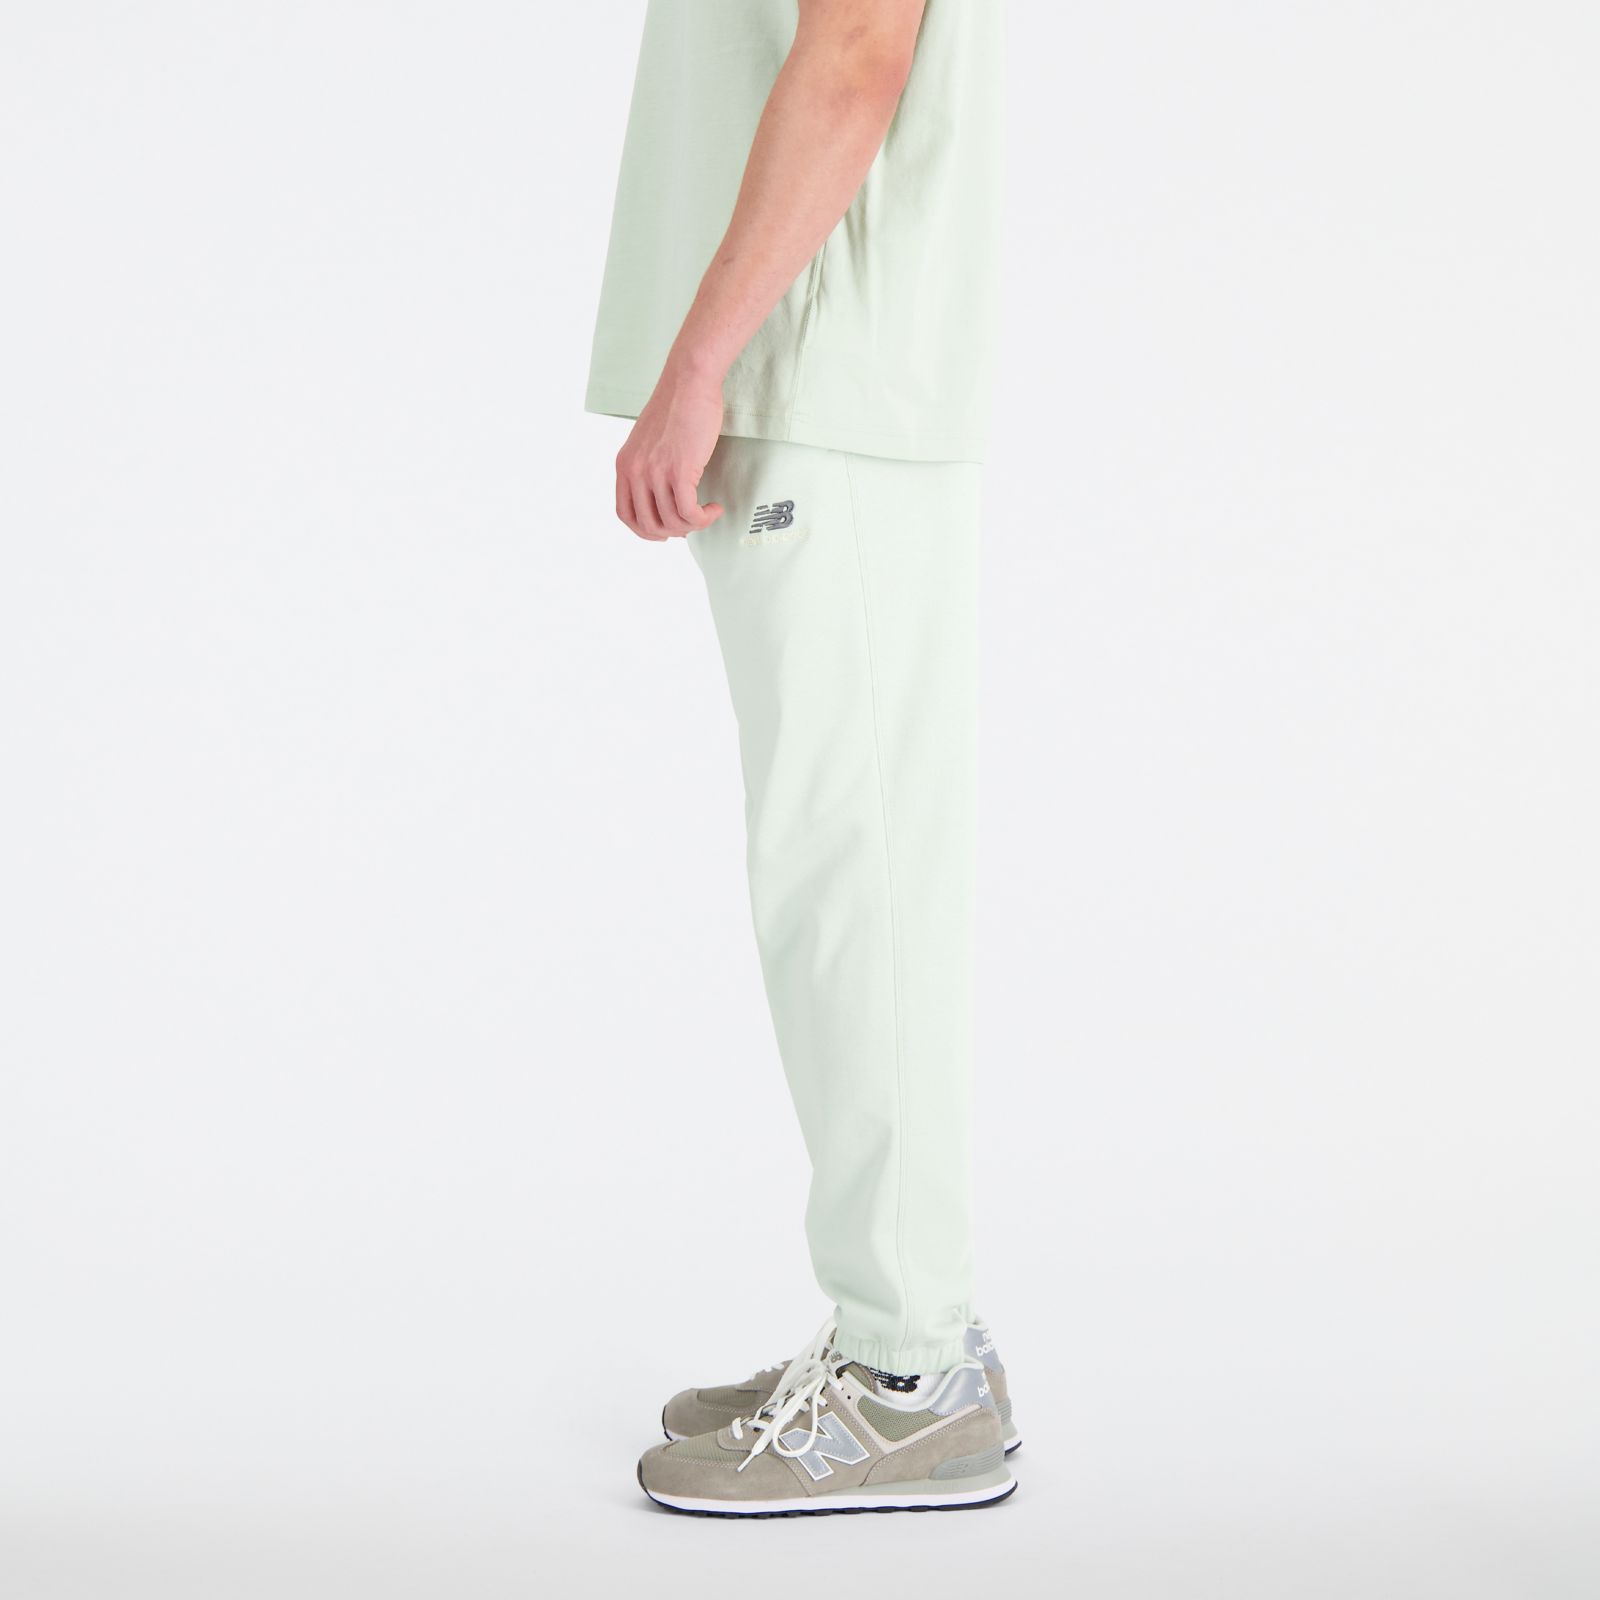 Uni-ssentials French Terry Sweatpant - Joe's New Balance Outlet